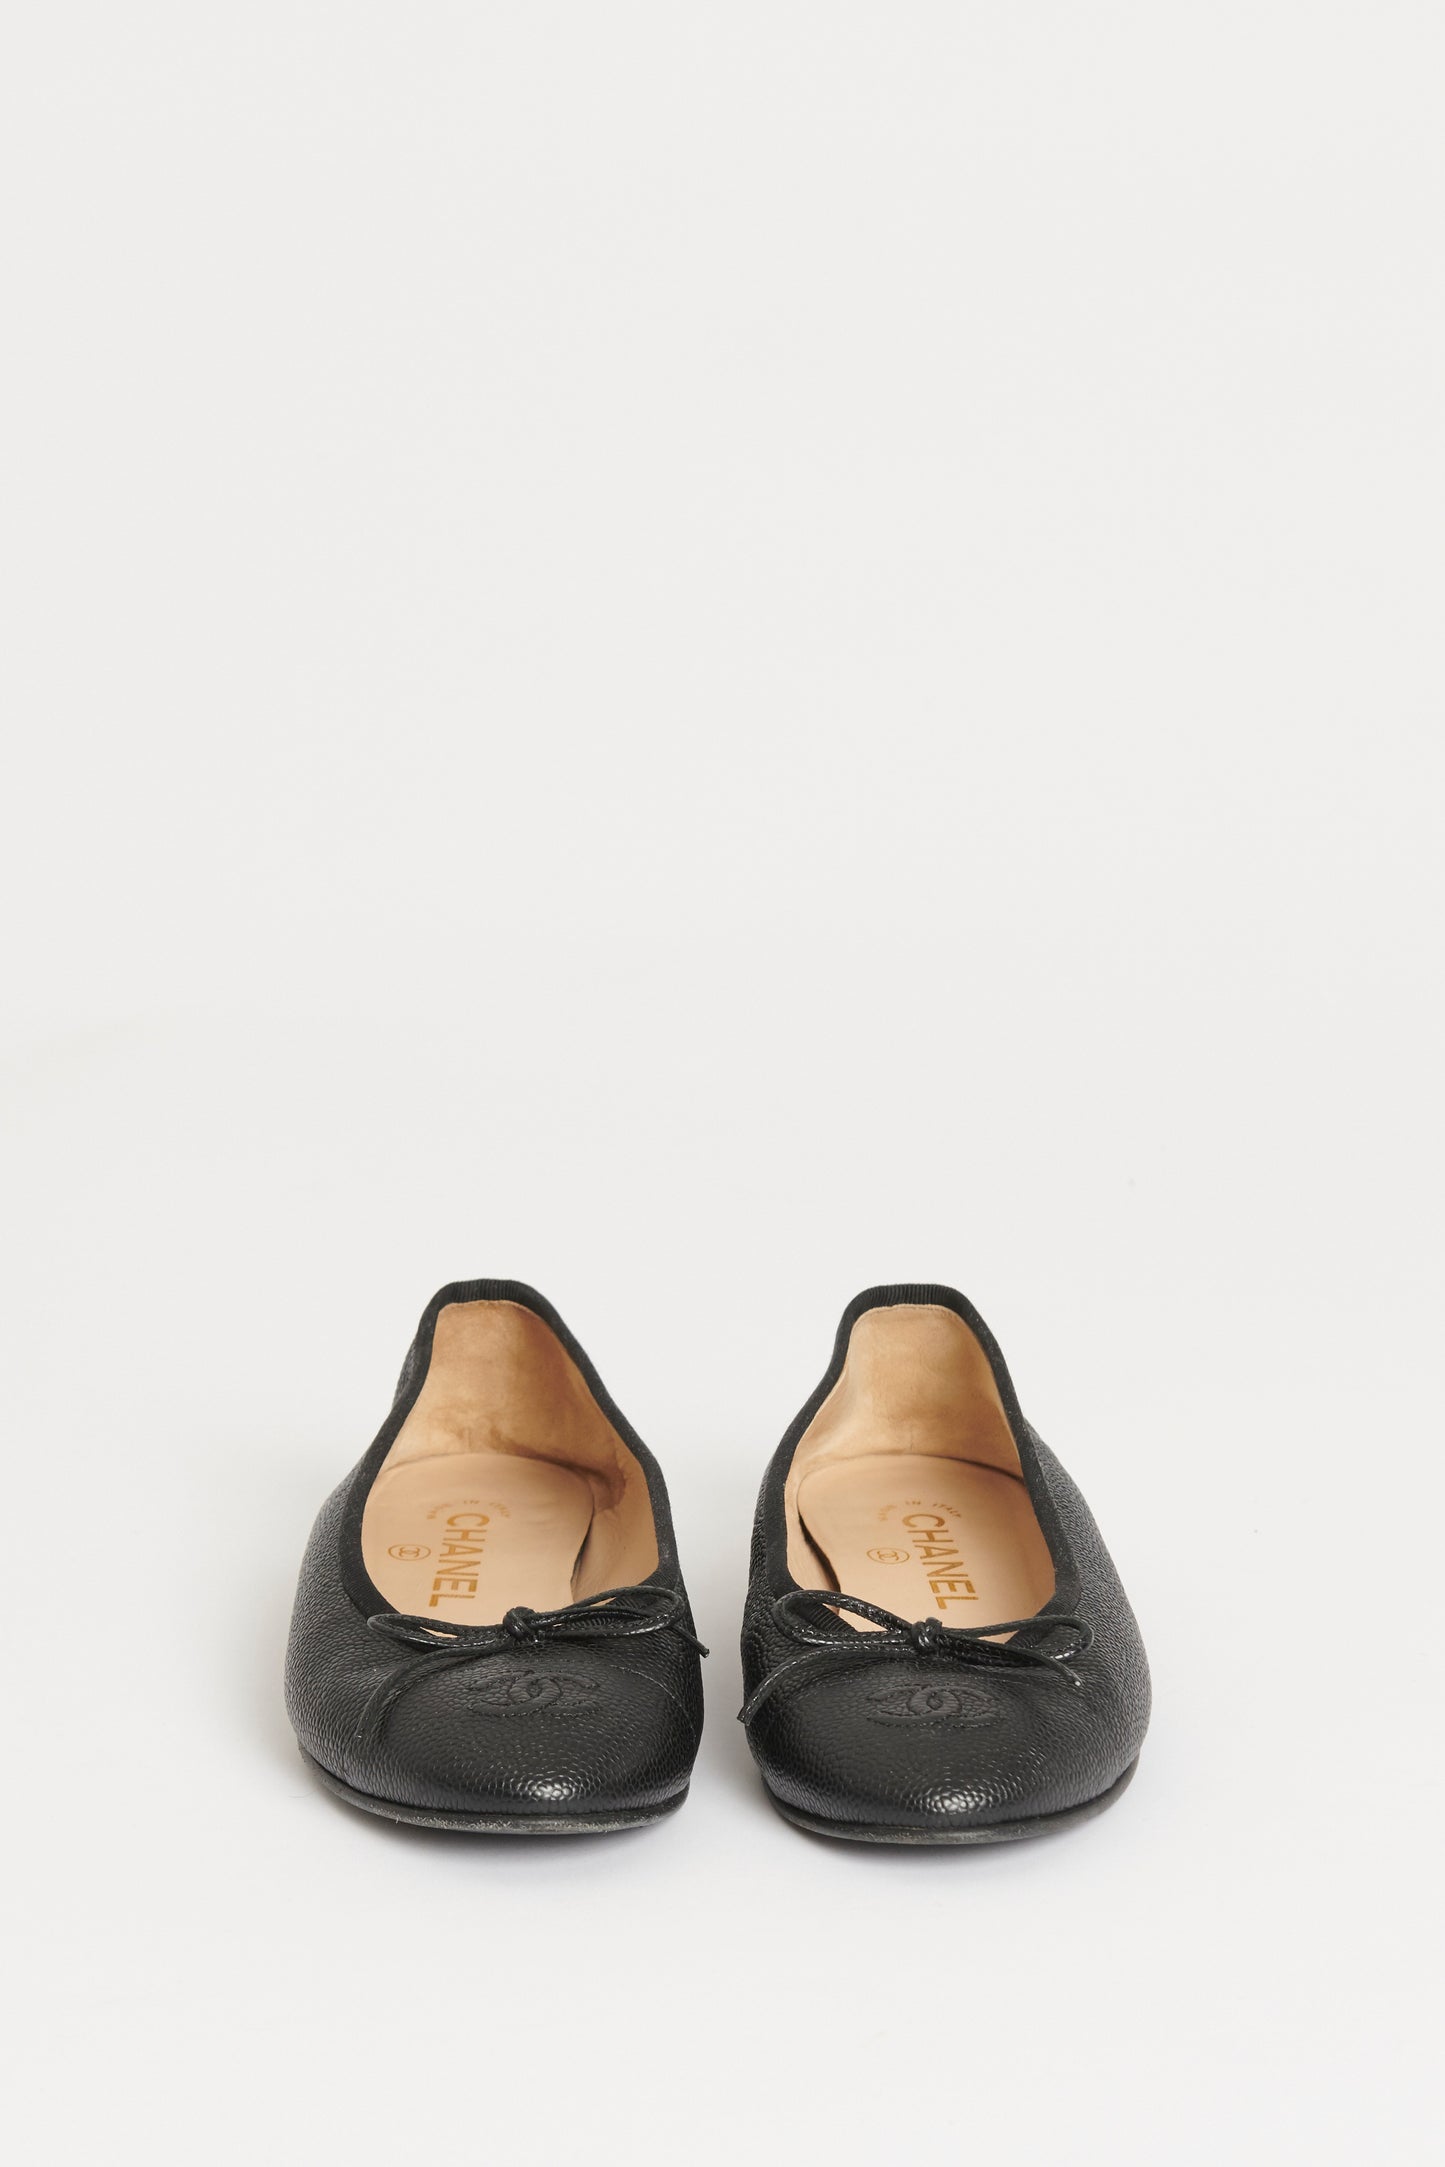 Black Caviar Leather Preowned CC Ballet Flats